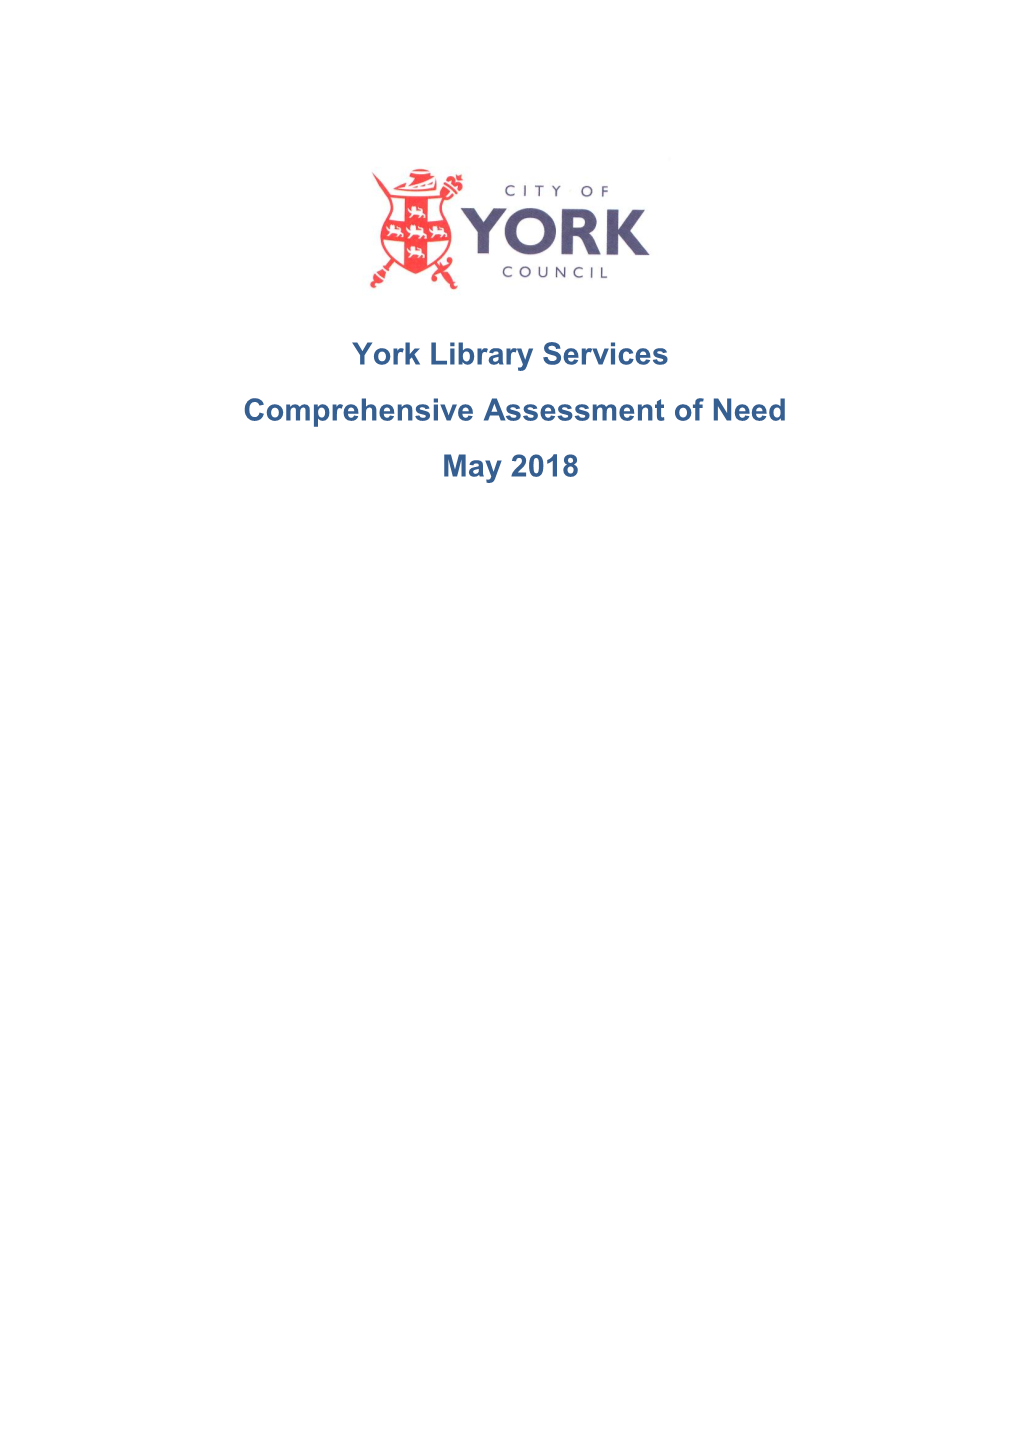 York Library Services Comprehensive Assessment of Need May 2018